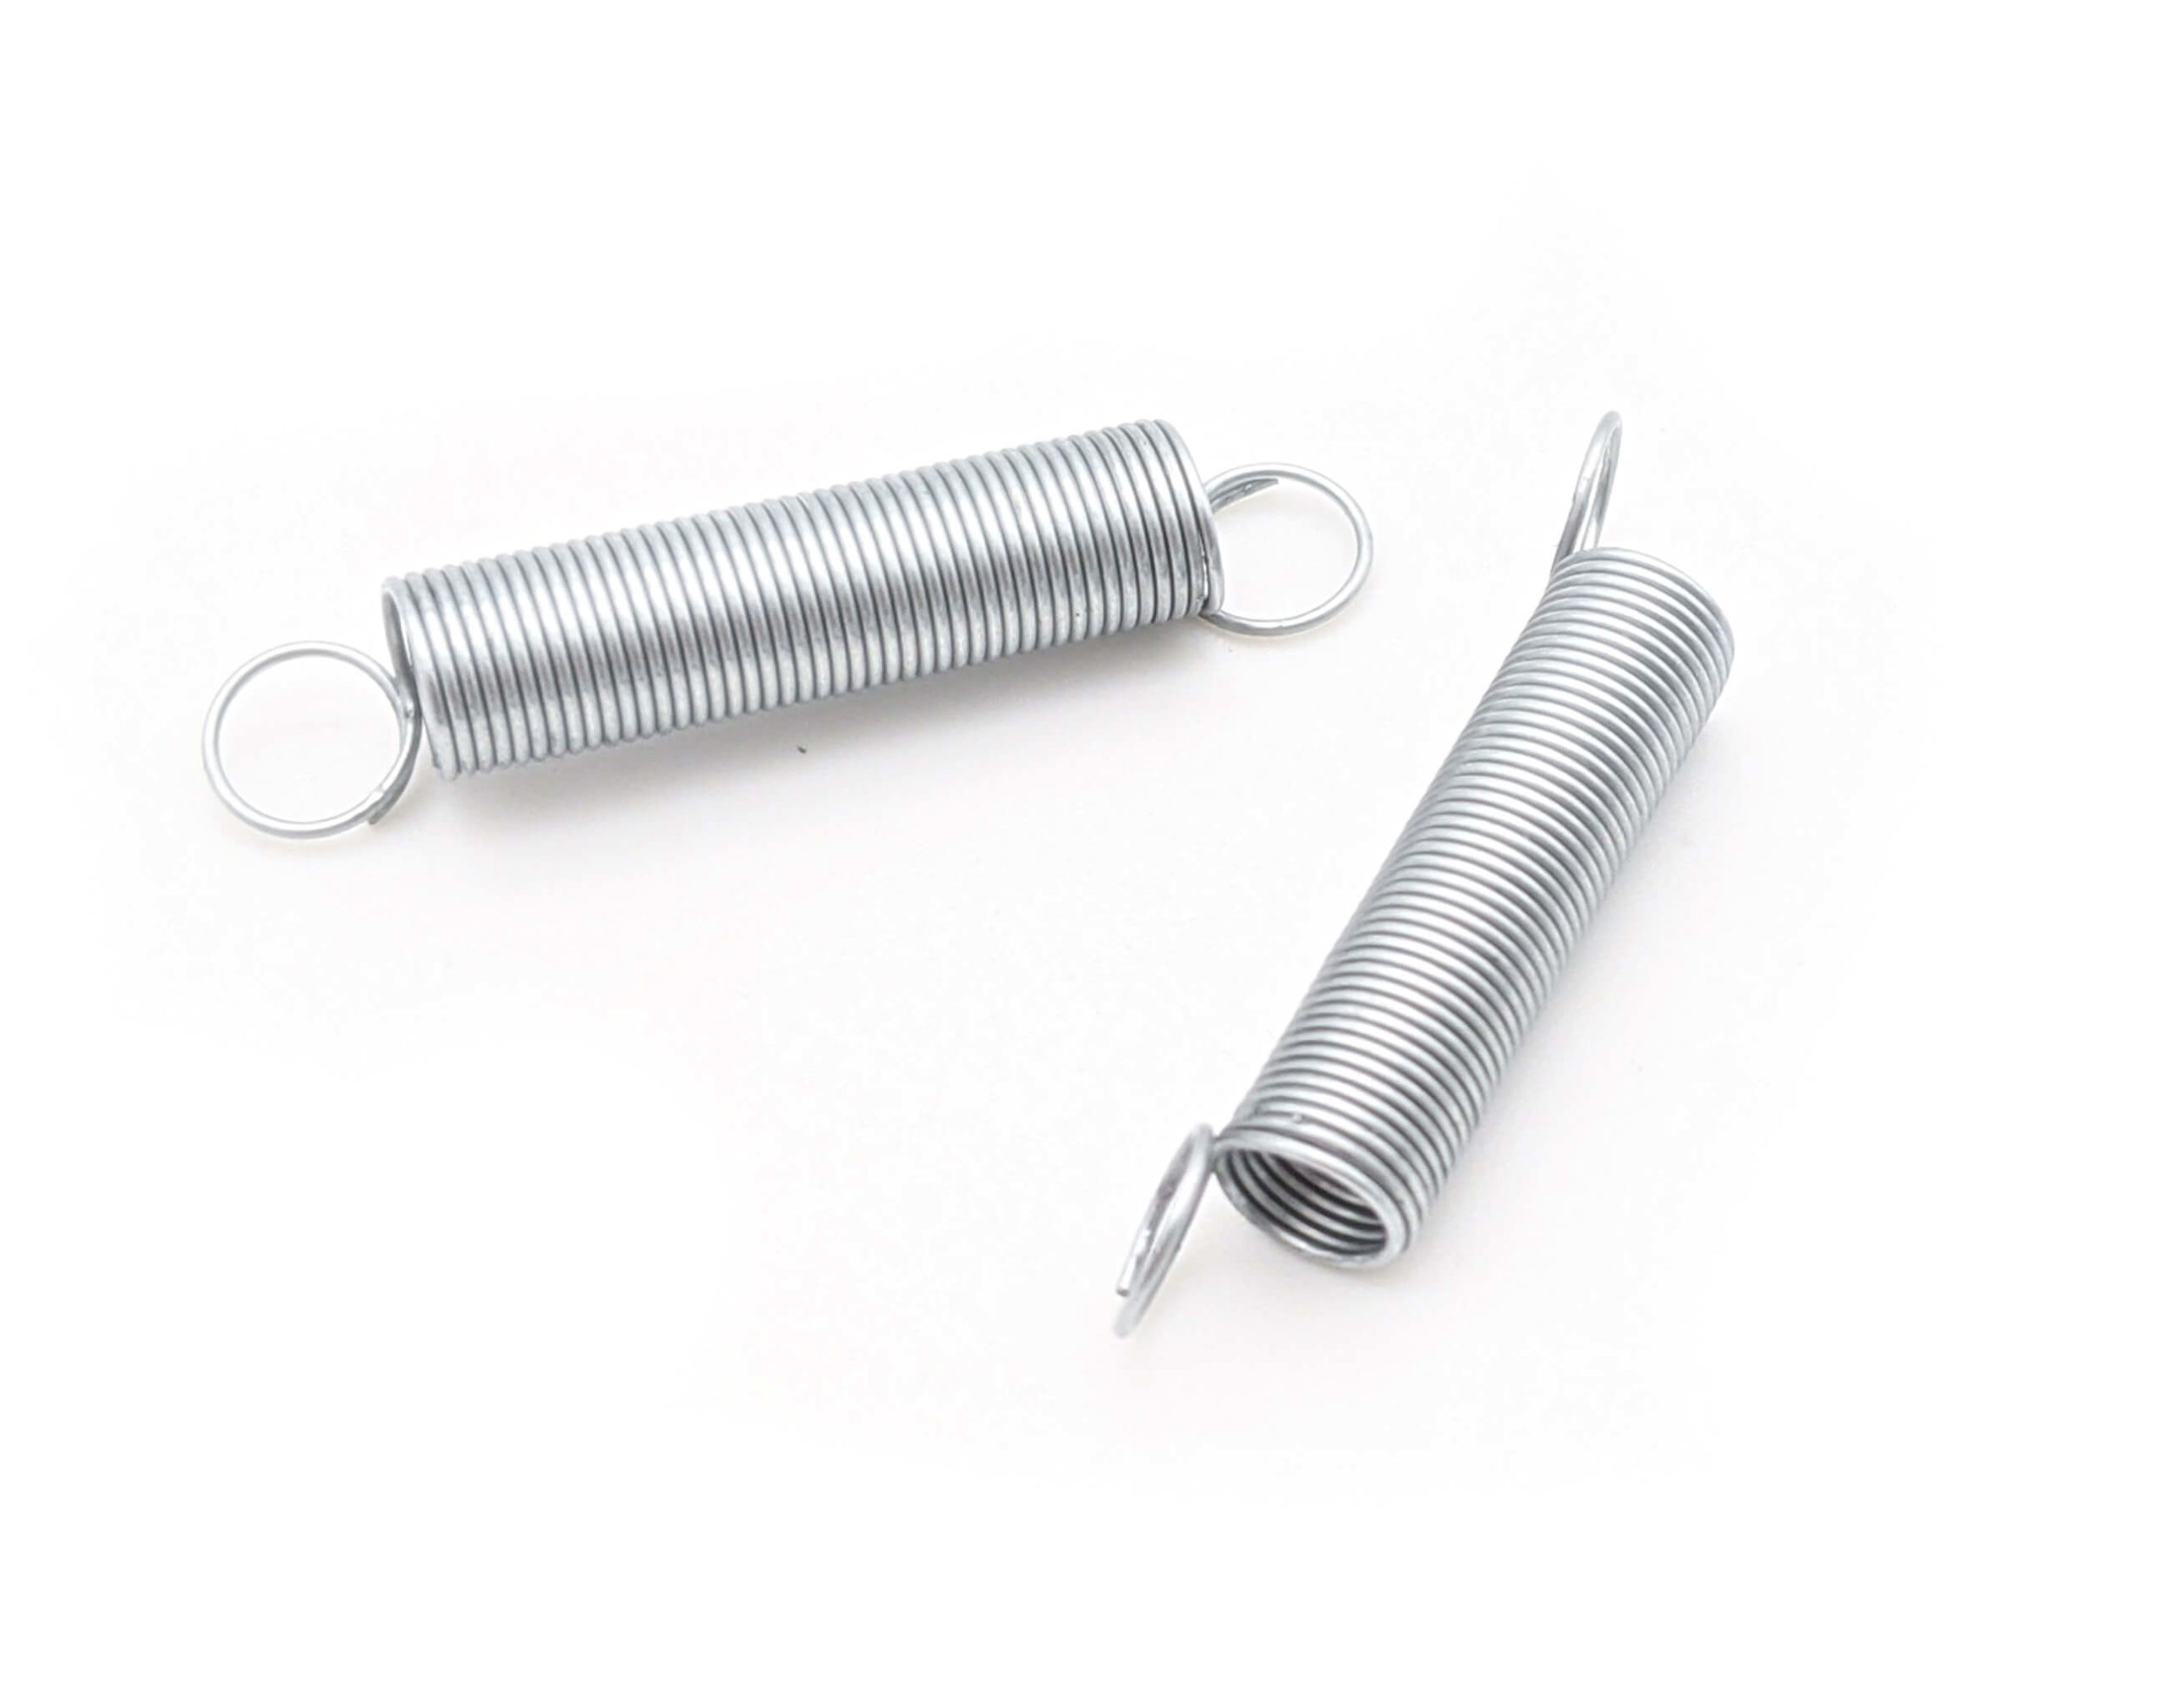 Mechanical Parts Extension Compression Spring 5pcs-Multiple Specifications Stainless Steel Extension Spring With Hooks Small Tension Springs 1mm Thickness Long Extension Springs Size : 1x8x40mm 